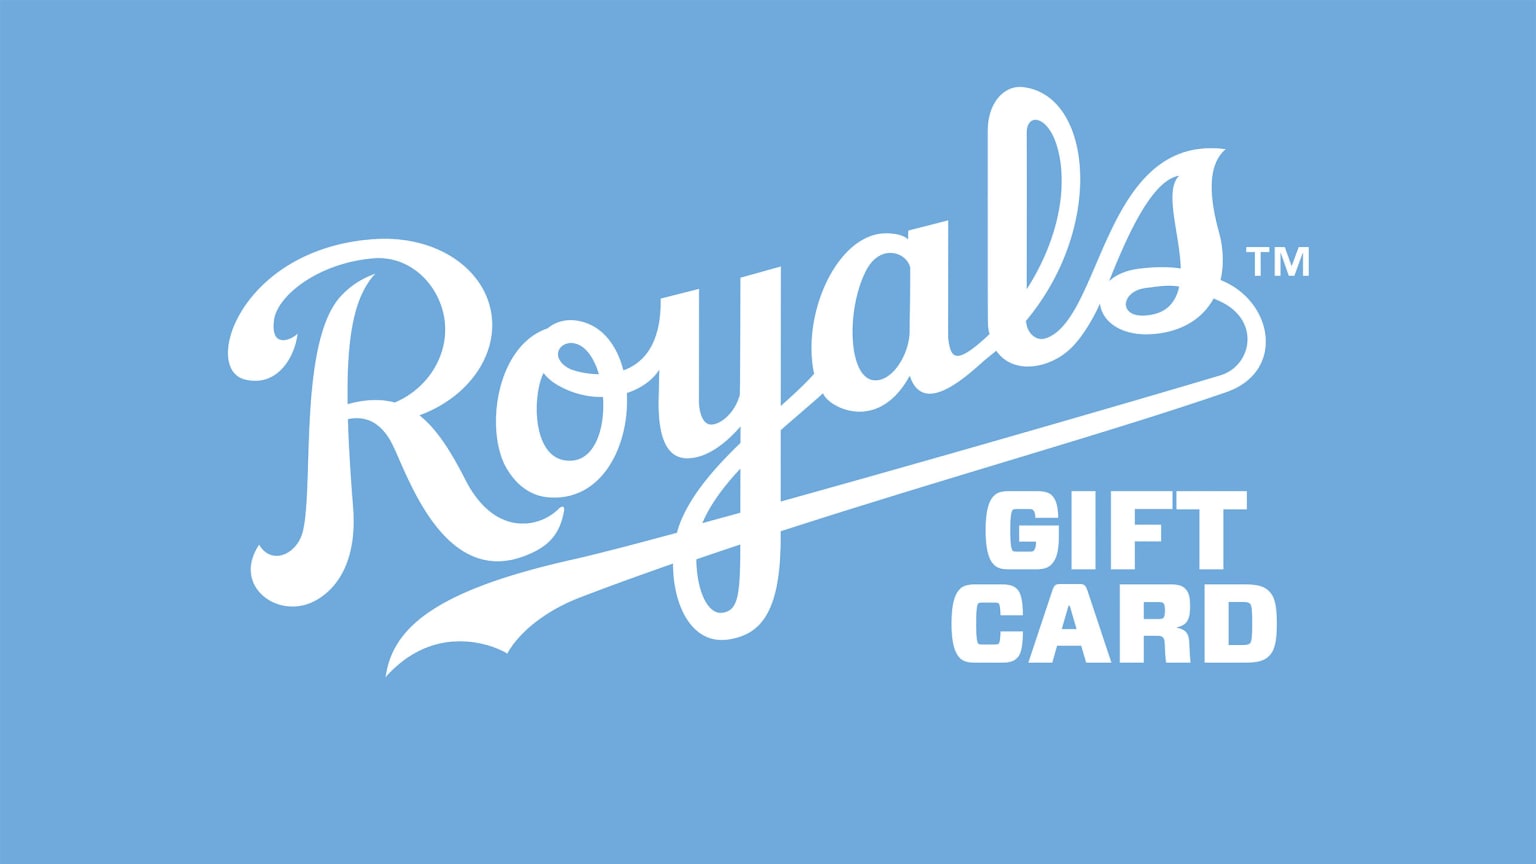 Kansas City Royals - Visit the #Royals Team Store for a free gift